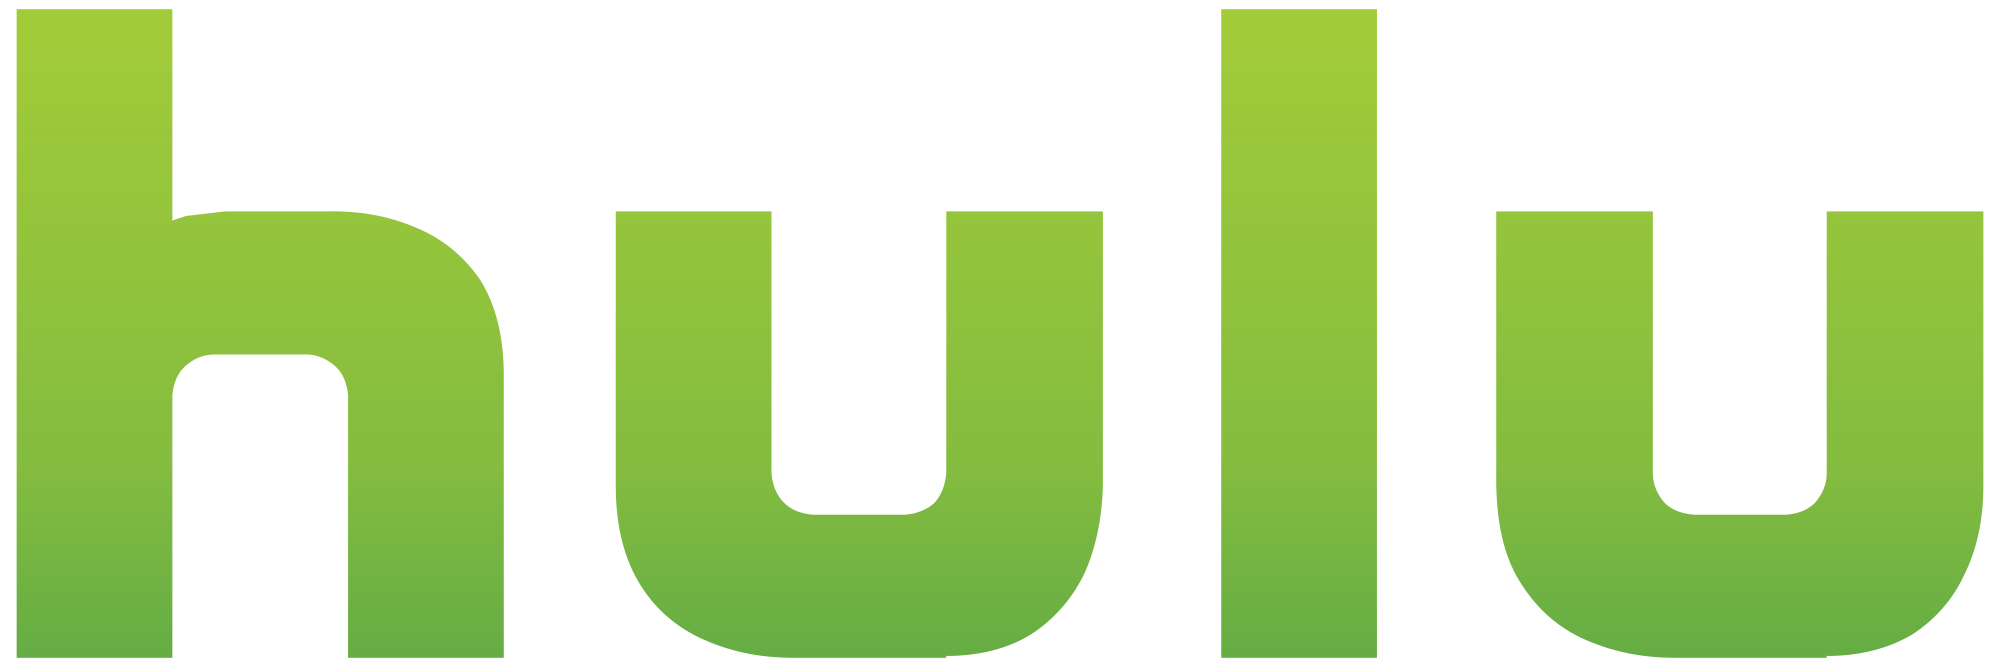 Hulu is a PLANNET technology project management client